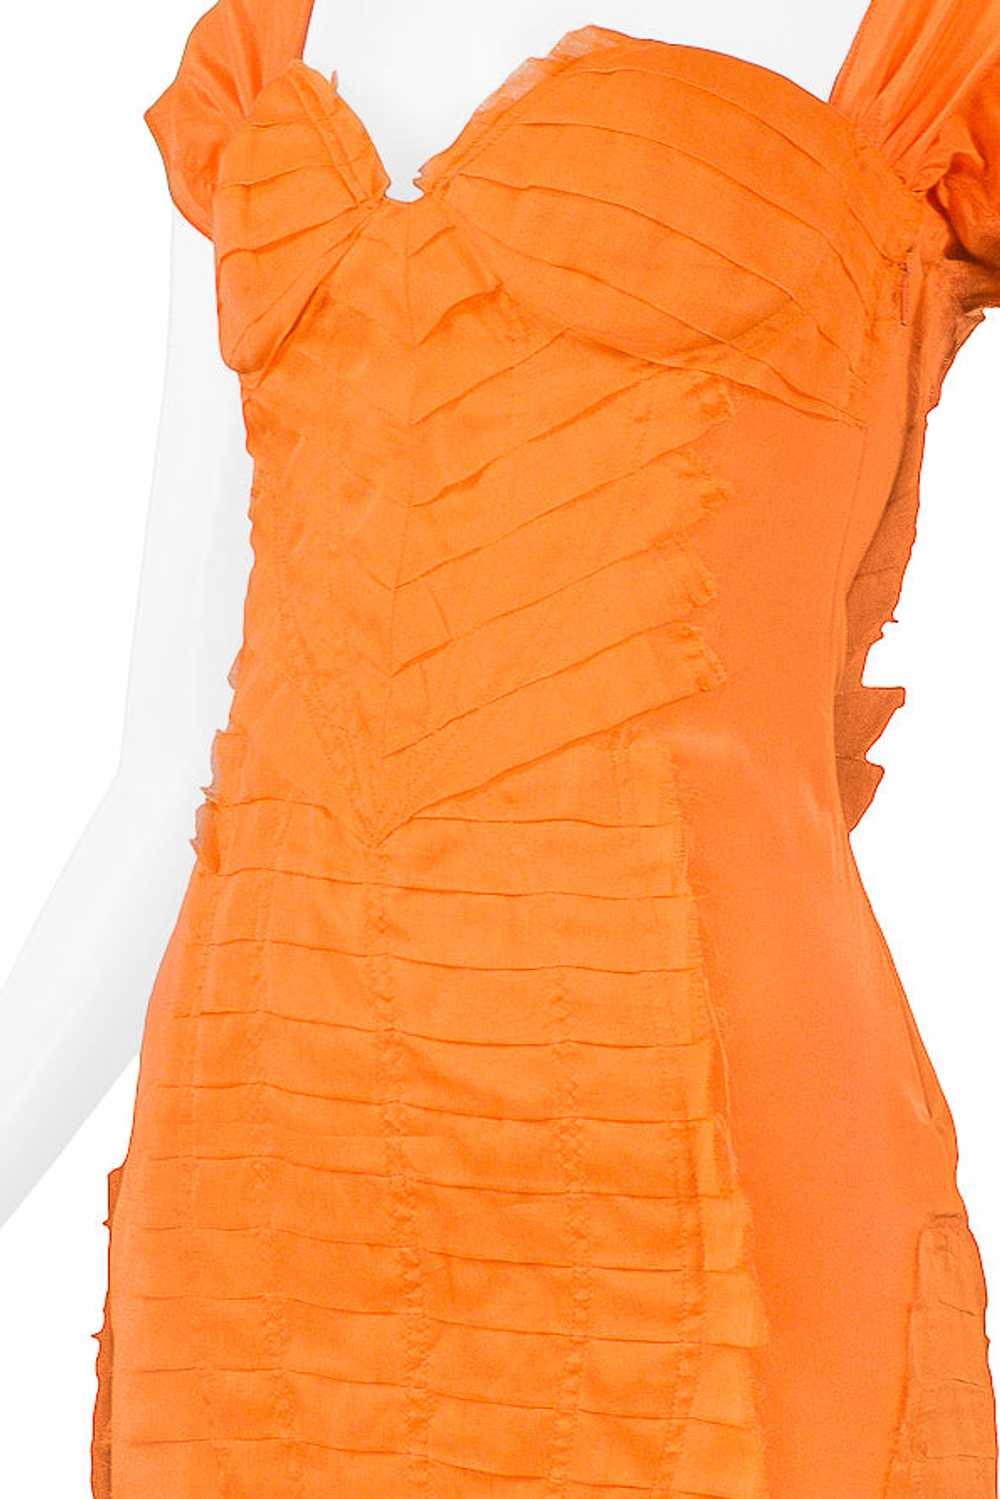 GUCCI BY TOM FORD ORANGE SILK COCKTAIL DRESS 2004 - image 7